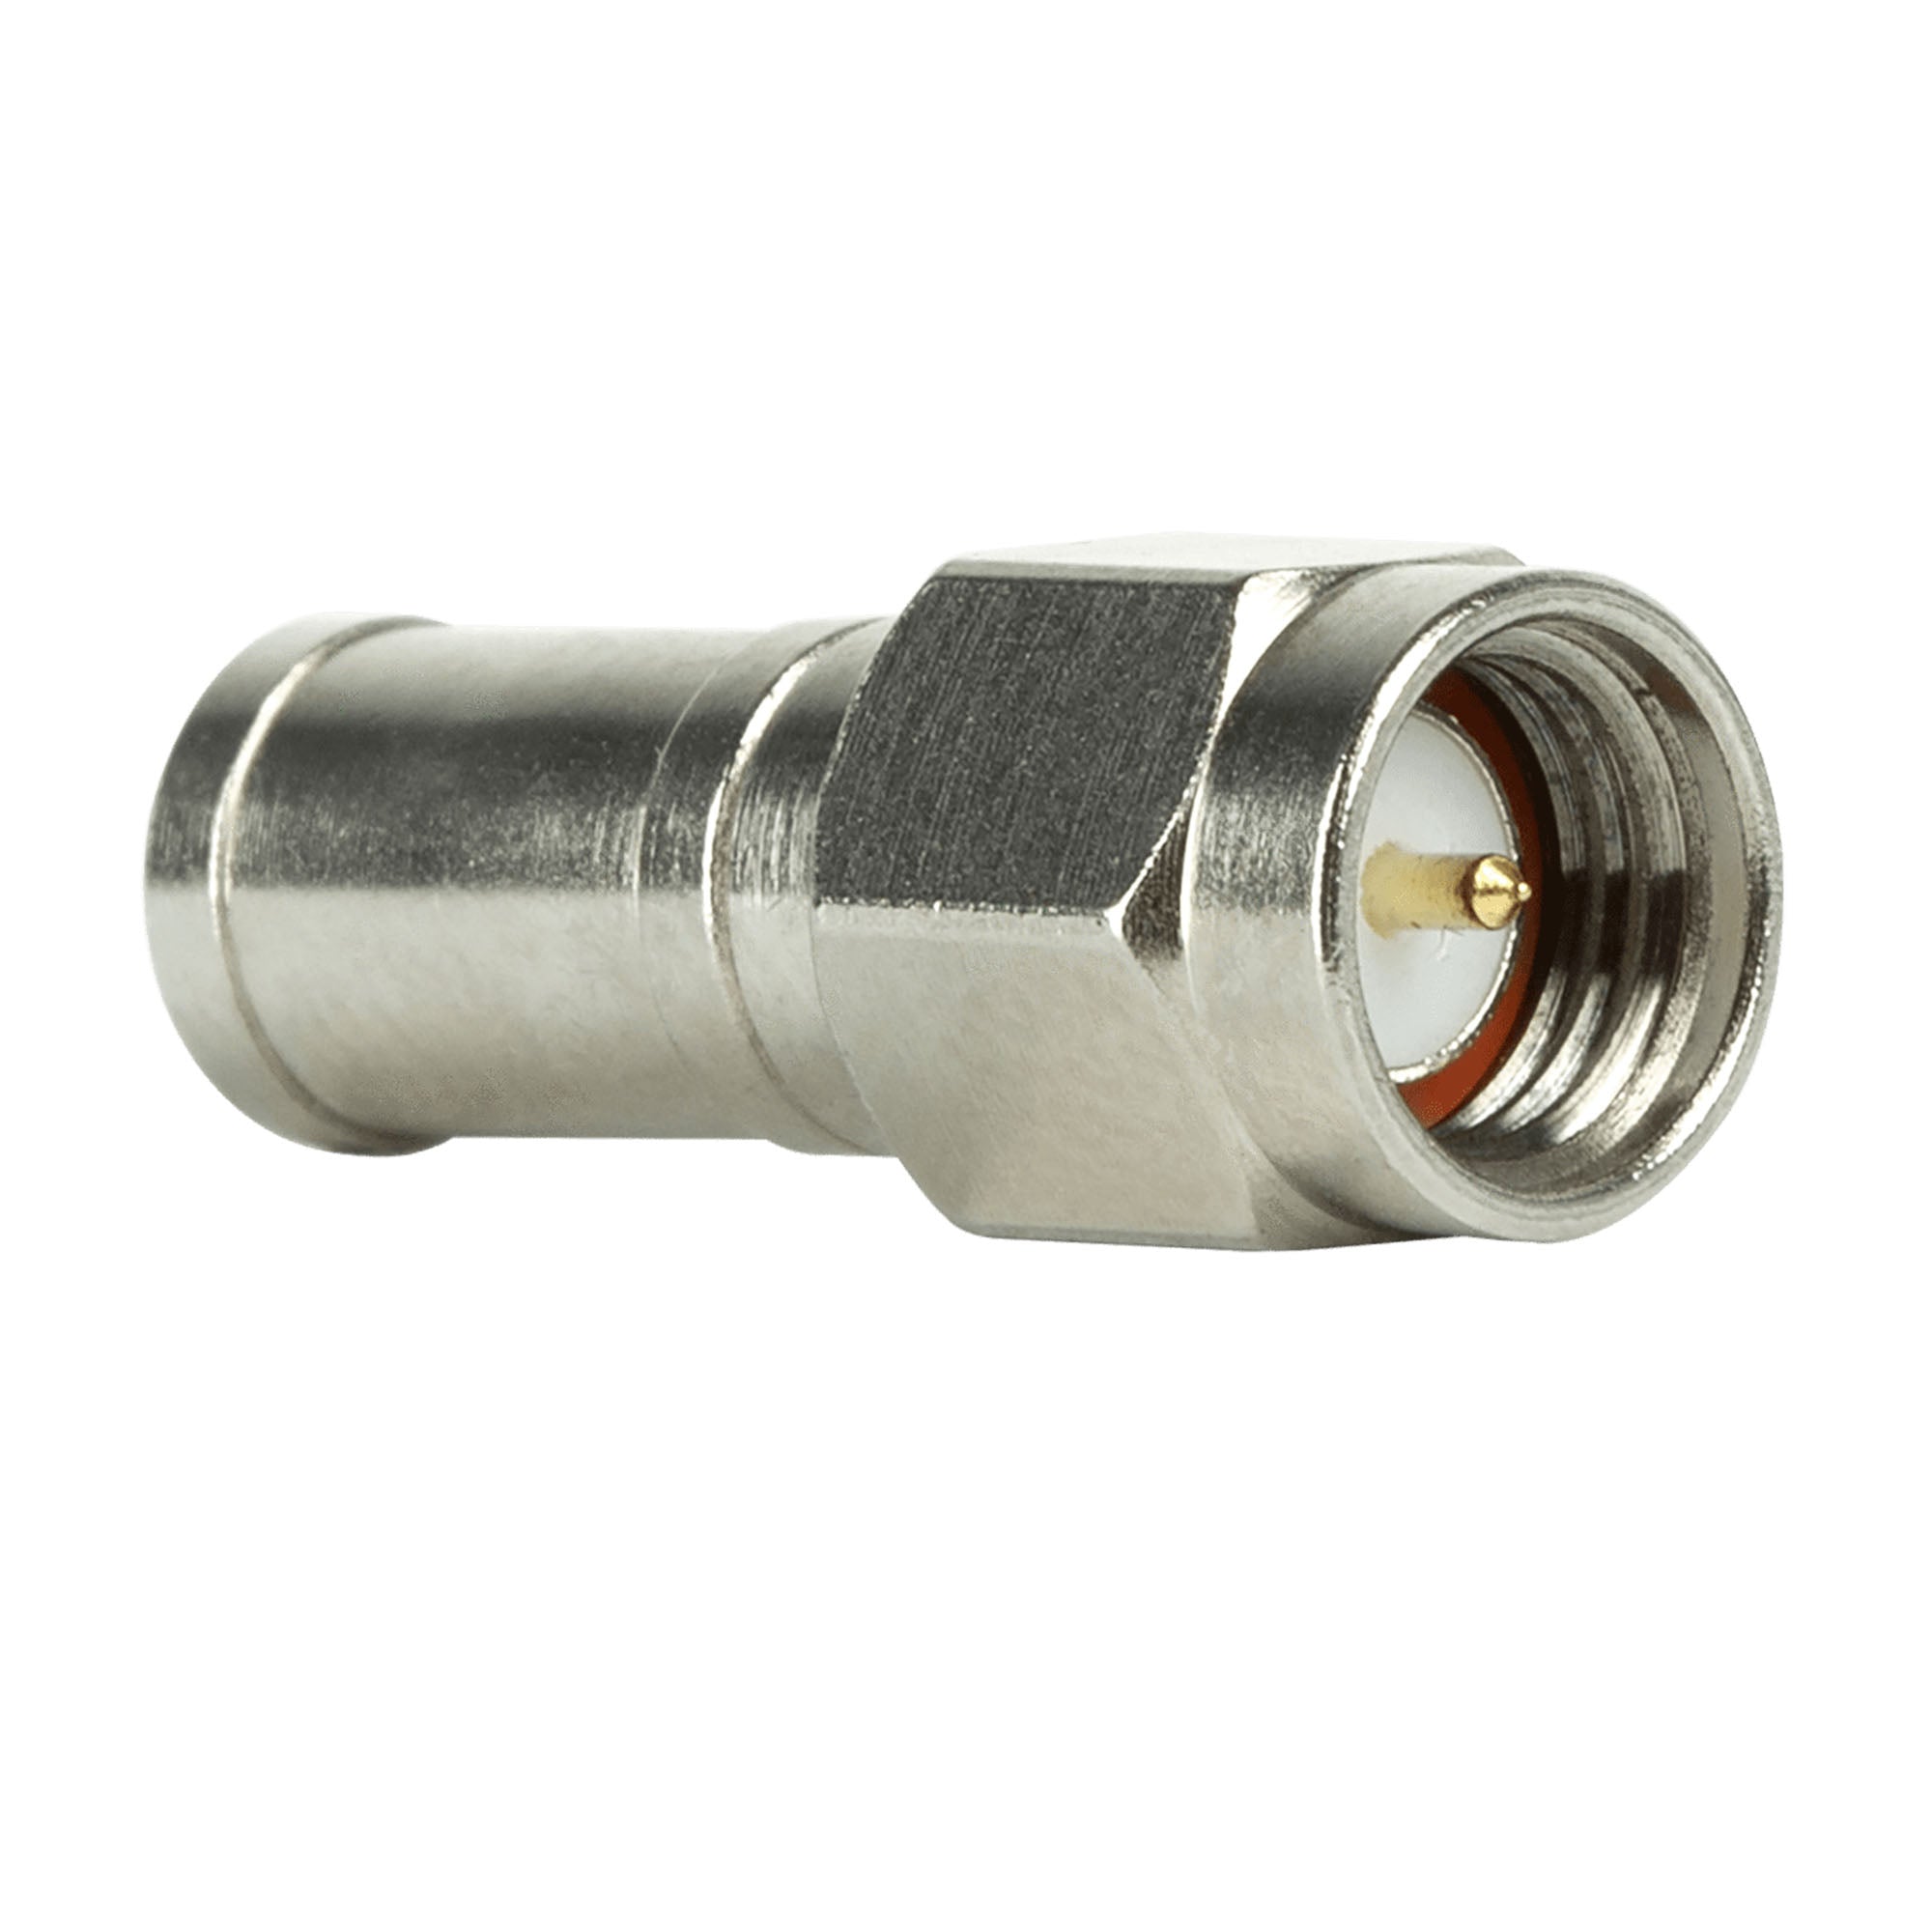 WeBoost SMB Plug to SMA Male Connector